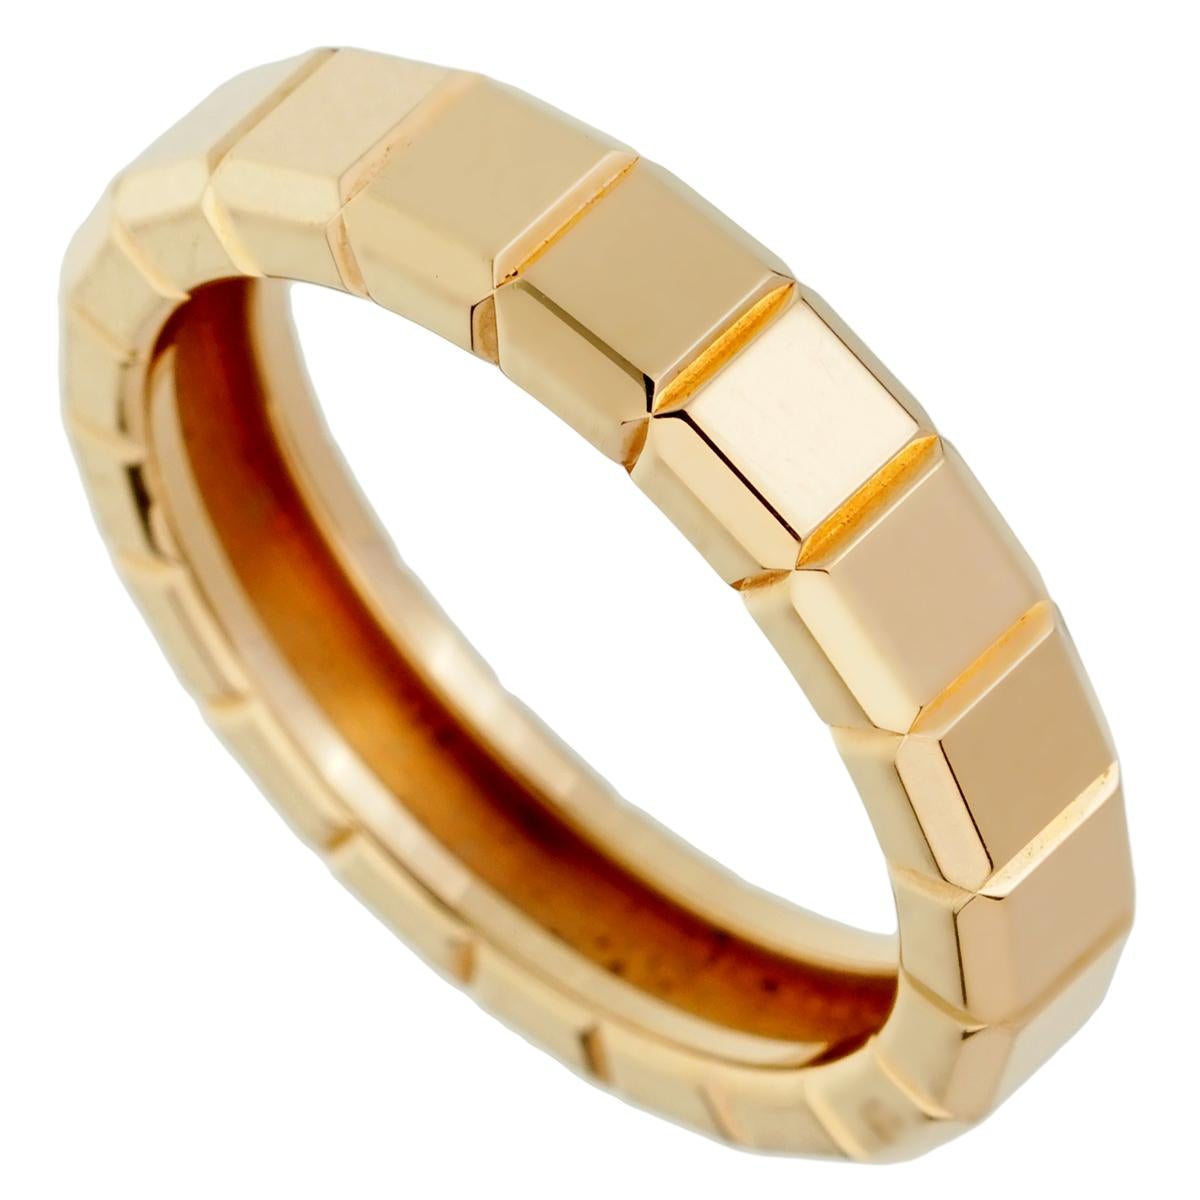 A chic Chopard band ring from the iconic Ice Cube collection showcases warm 18k rose gold panels catching light from all angles.

Size 6 3/4

Sku: 1731